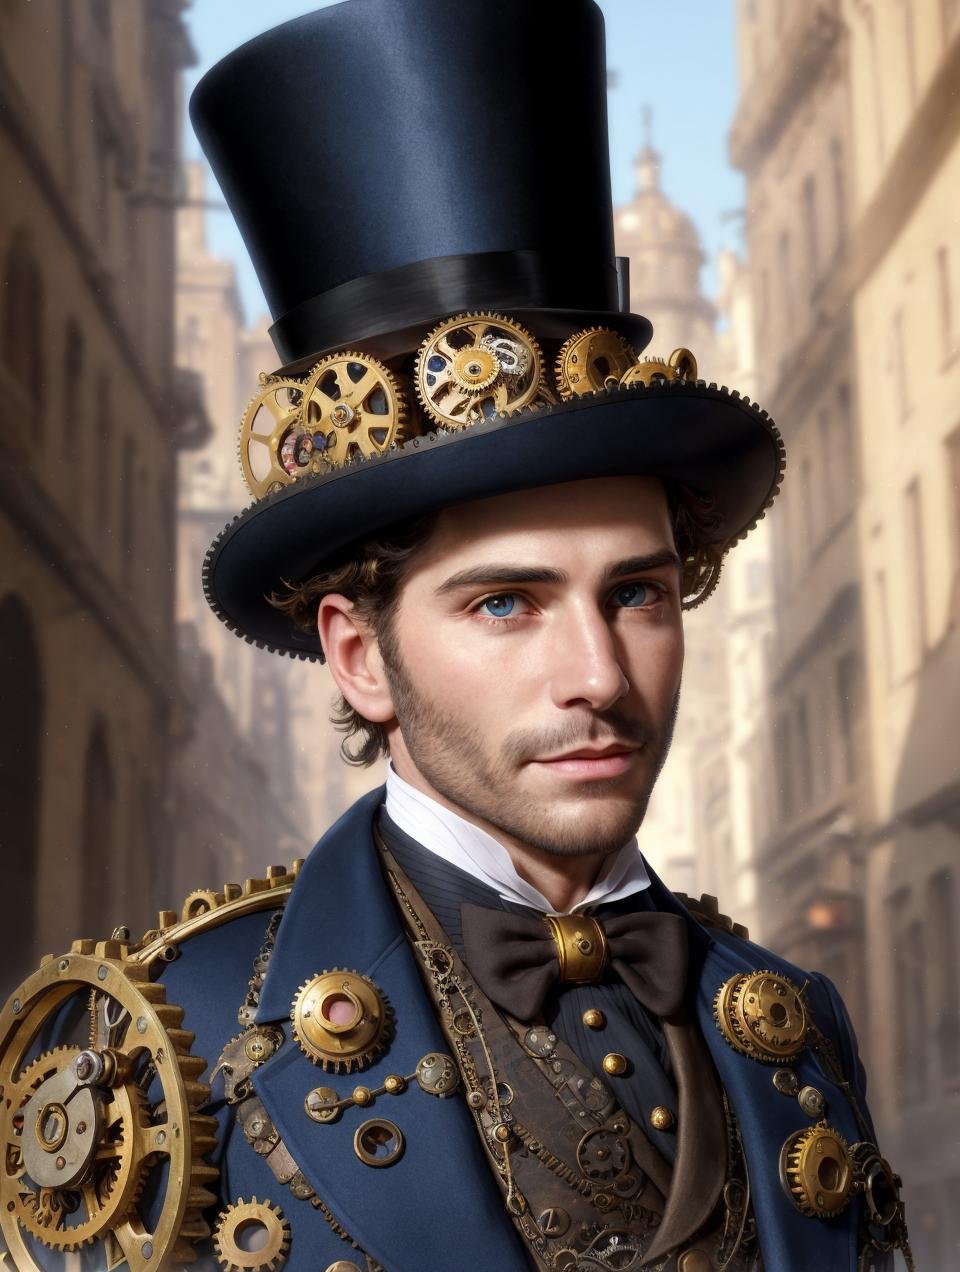 (GS-Masculine:1) (one male), Very detailed youthful face, heroic, detailed realistic open eyes, high quality, vibrant colors, photorealistic, masterpiece, Diffuse lighting, soft light, glistening skin, calm expression, suggestive, steampunk style, an urban steampunk city, buildings made of brass cogs and gears, tailcoat tuxedo and a top hat